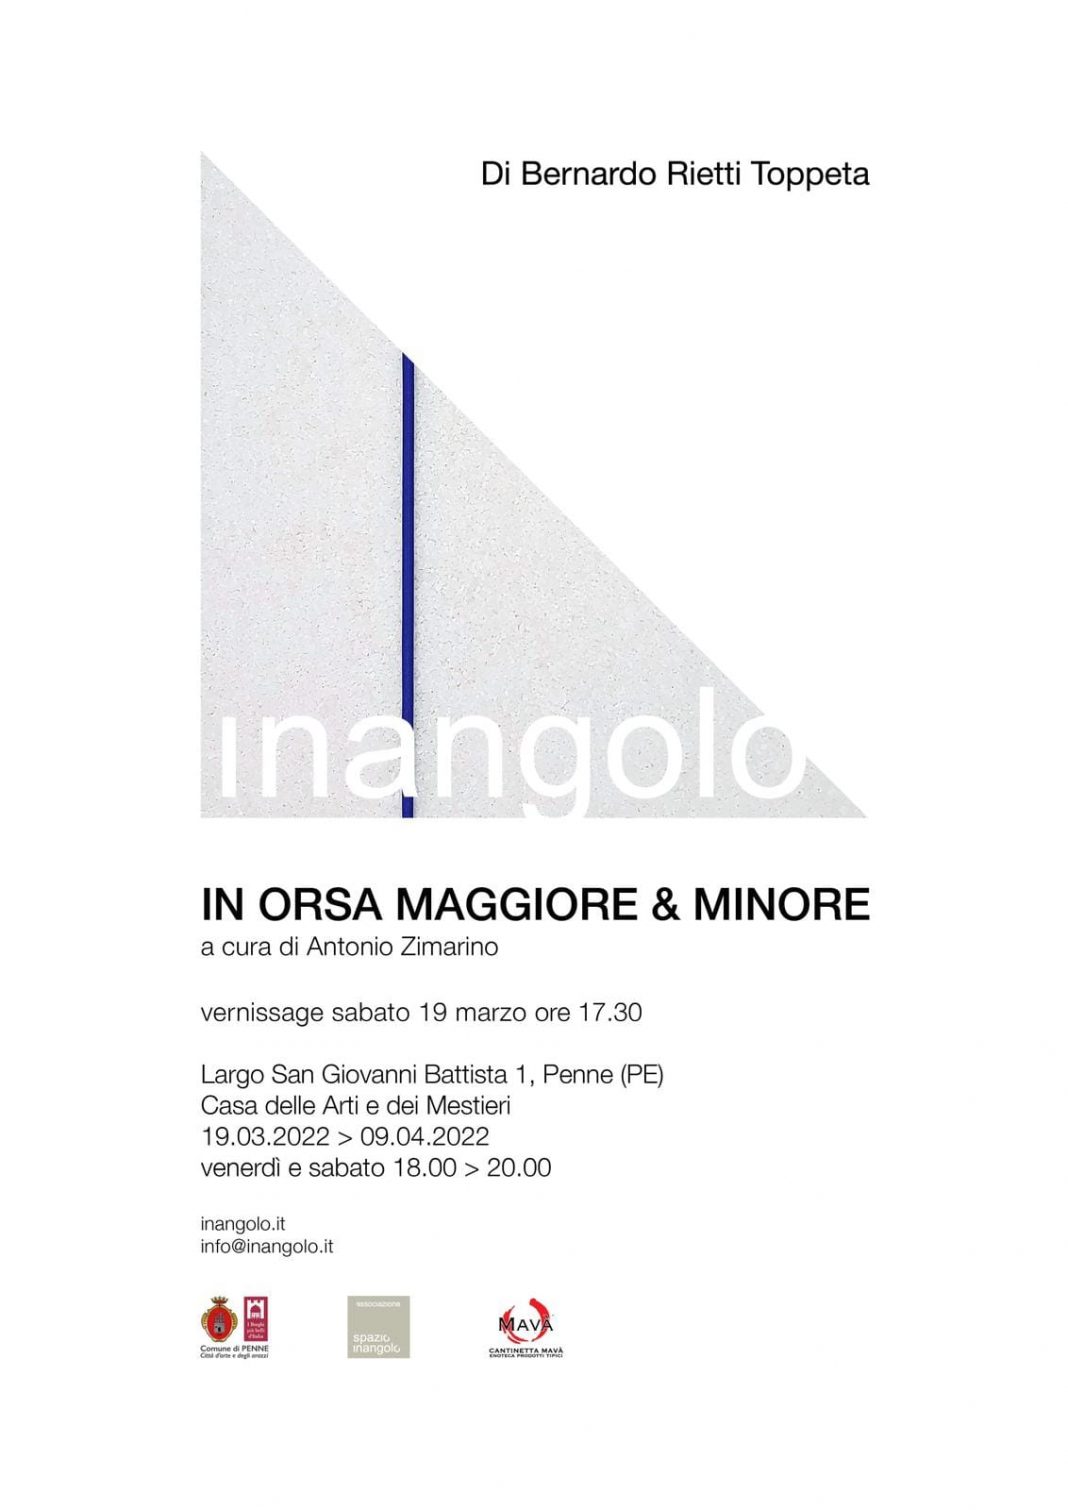 IN ORSA MAGGIORE & MINOREhttps://www.exibart.com/repository/media/formidable/11/img/ae7/l-1068x1510.jpg